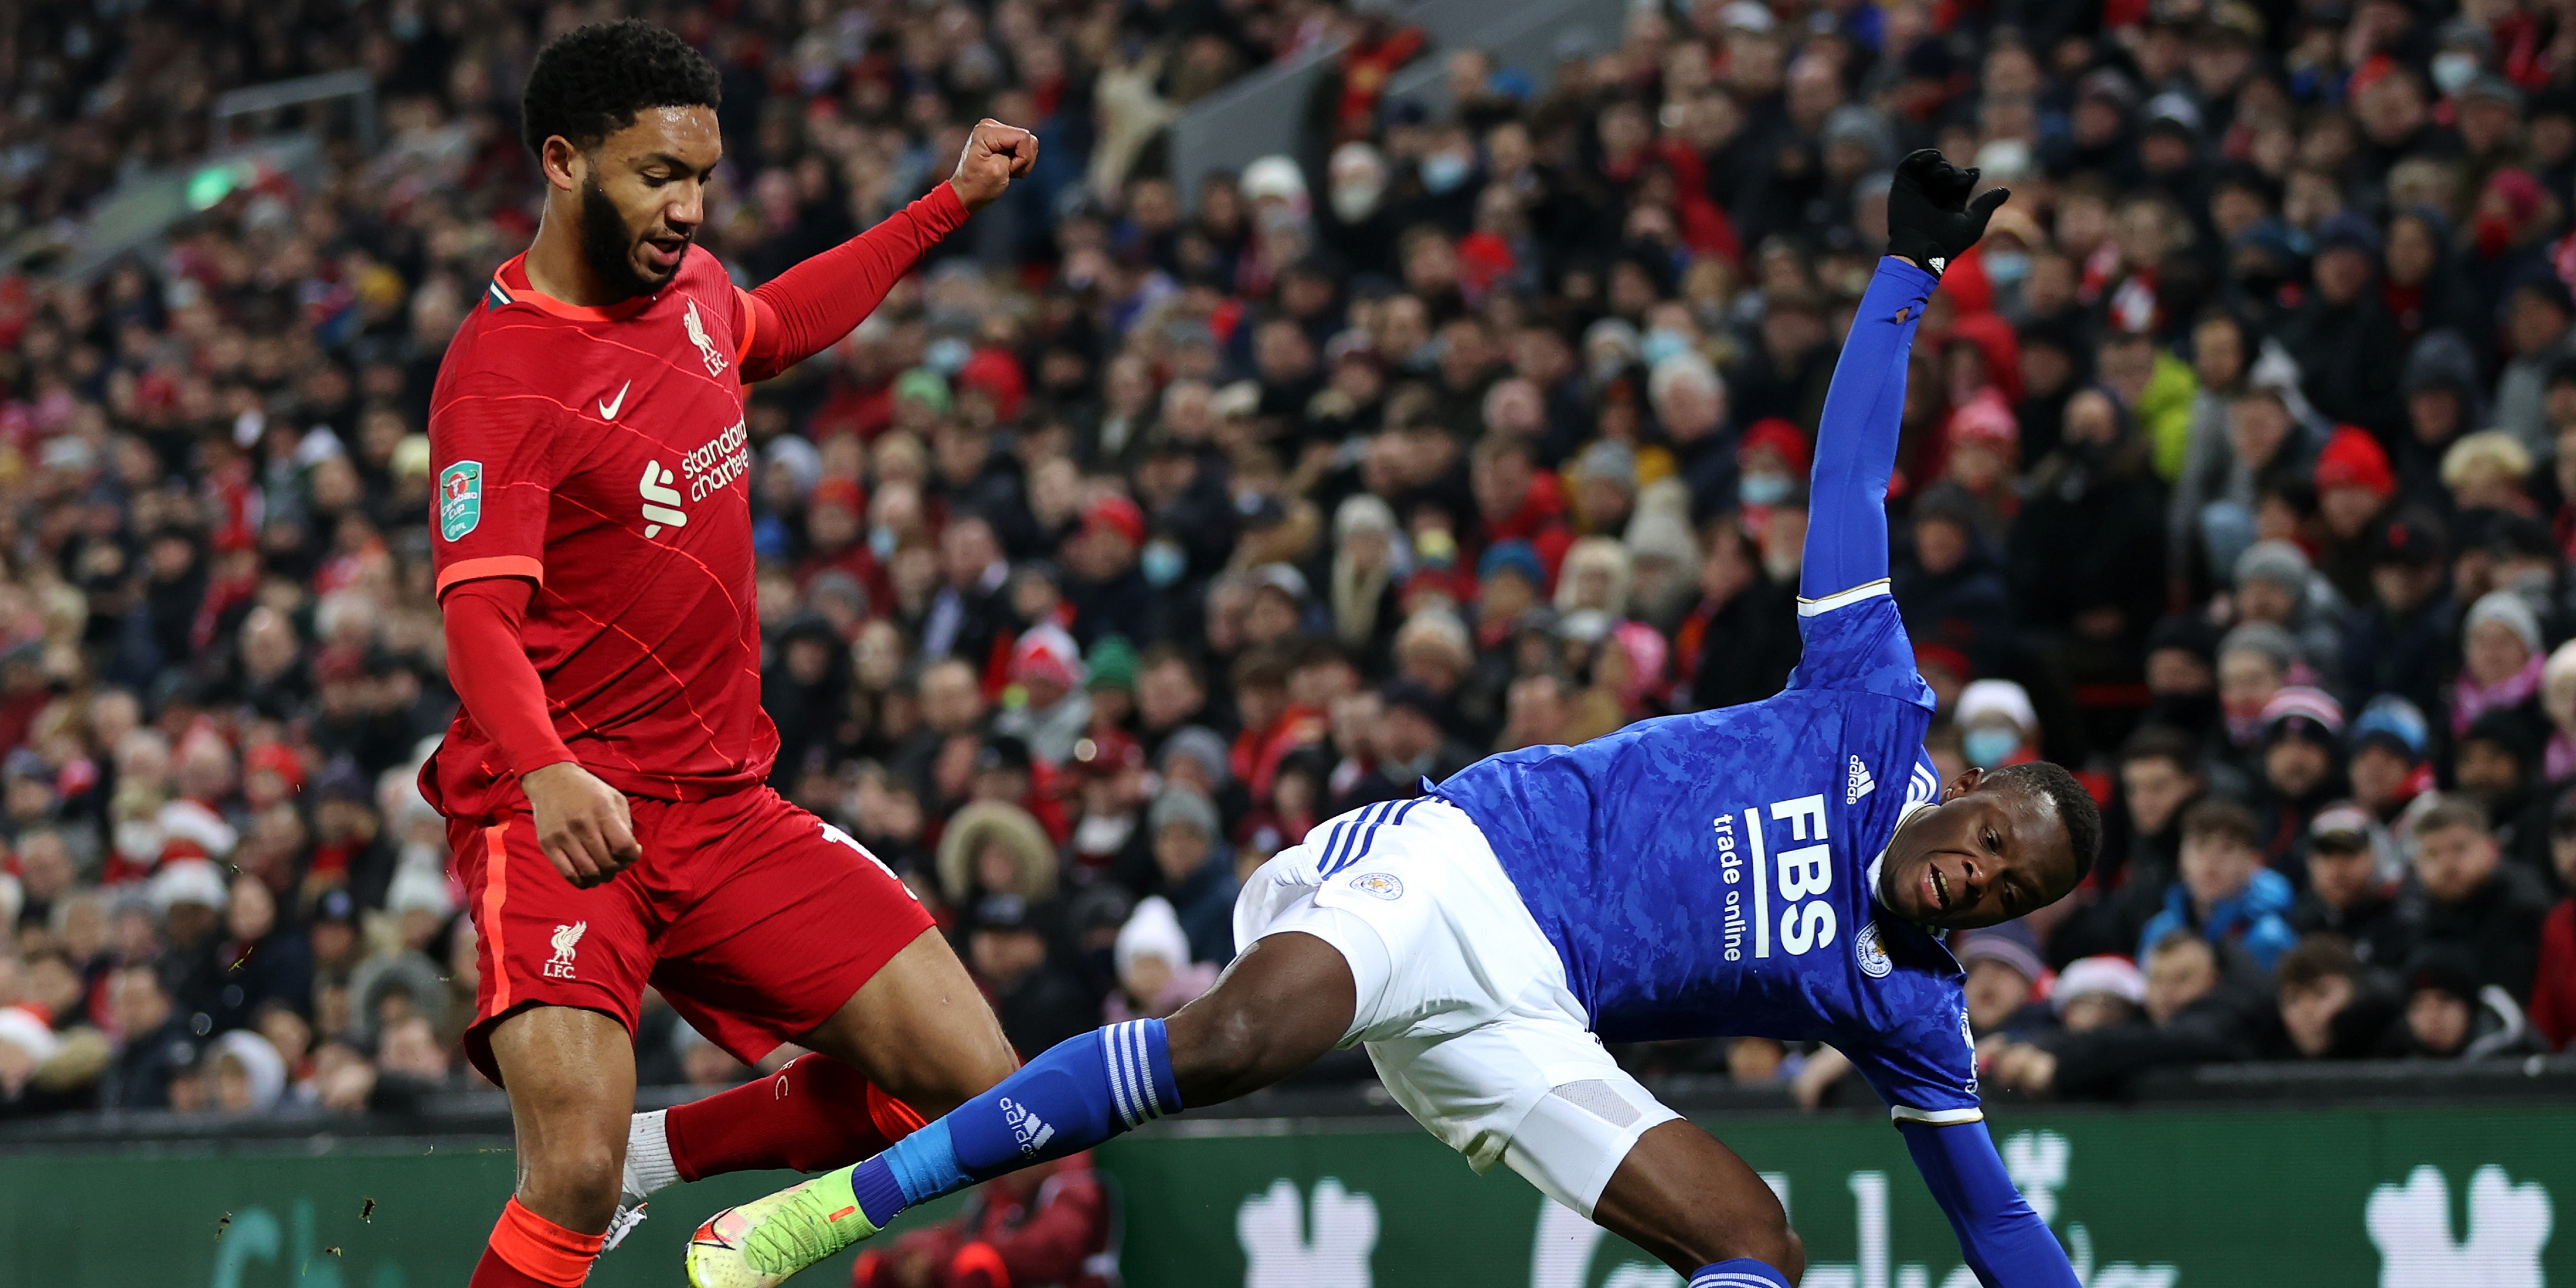 ‘Like Chuckle Brothers’ – These Liverpool fans blast 24-year-old star’s ‘comical’ first-half performance as Reds 3-1 down v Foxes